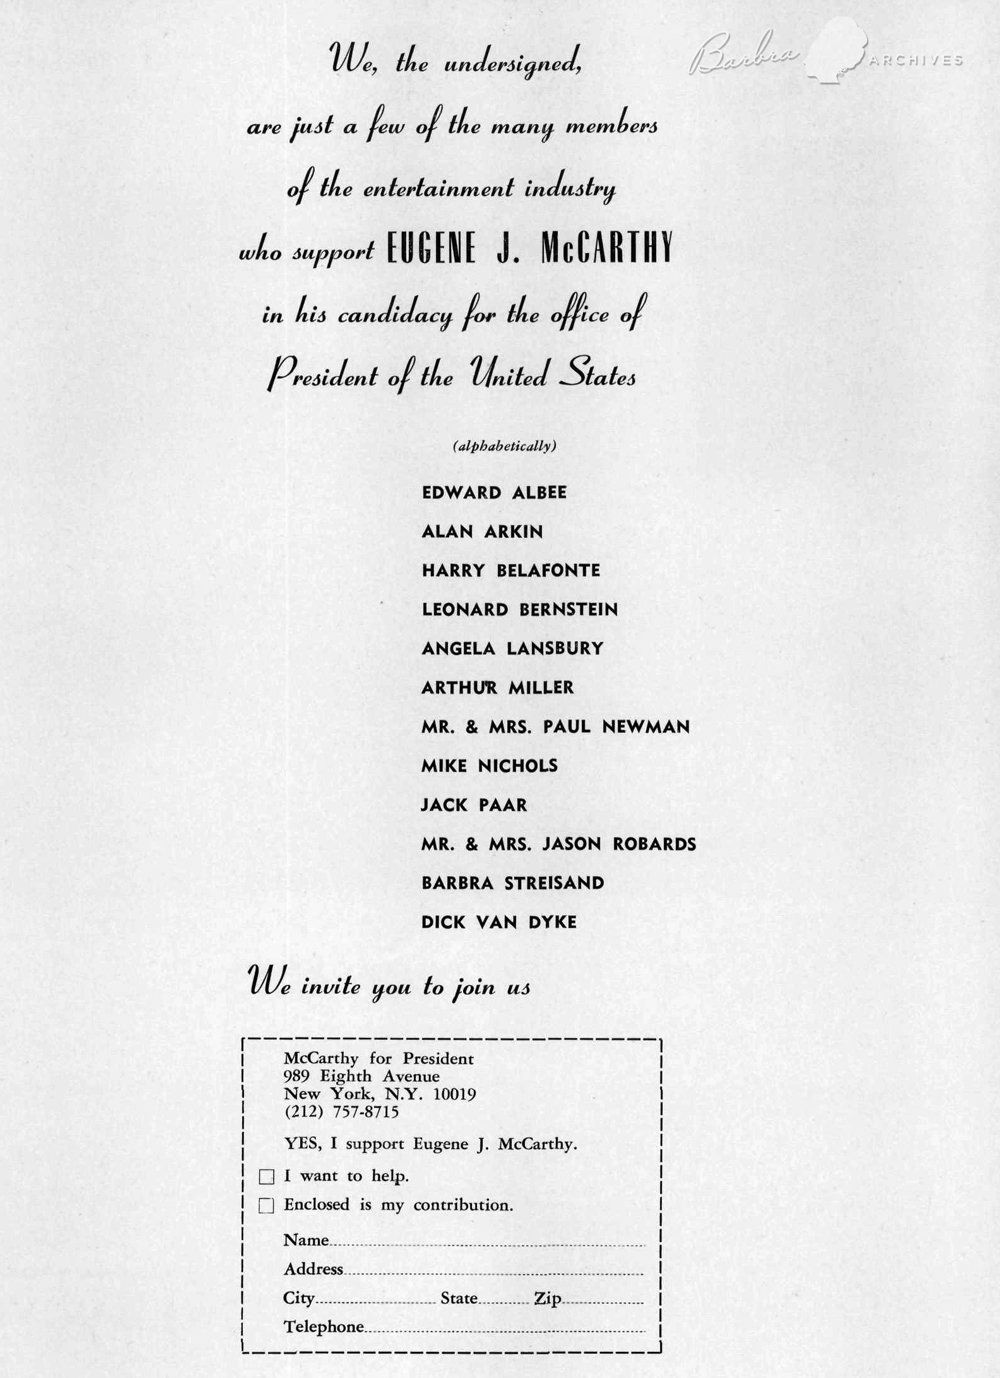 Industry ad with list of celebrities supporting Eugene Mccarthy for president.